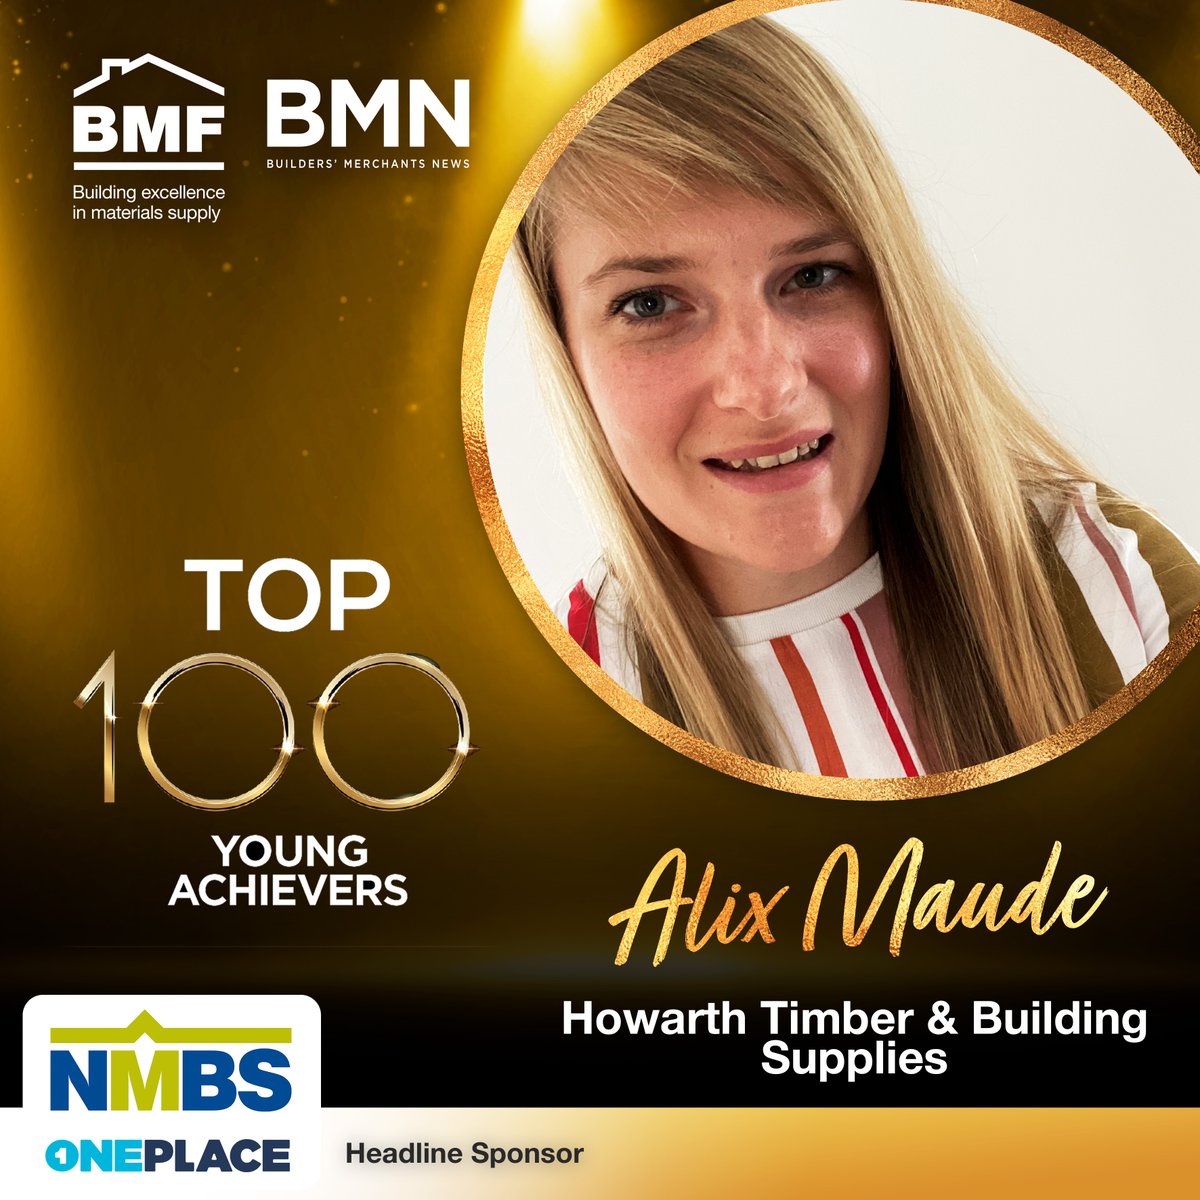 Today’s BMF and @BMerchantsNews Top 100 Young Achievers is Alix Maude, Building Category Manager at @howarthtimber. Head sponsor, @NationalMerch. #Top100YoungAchiever